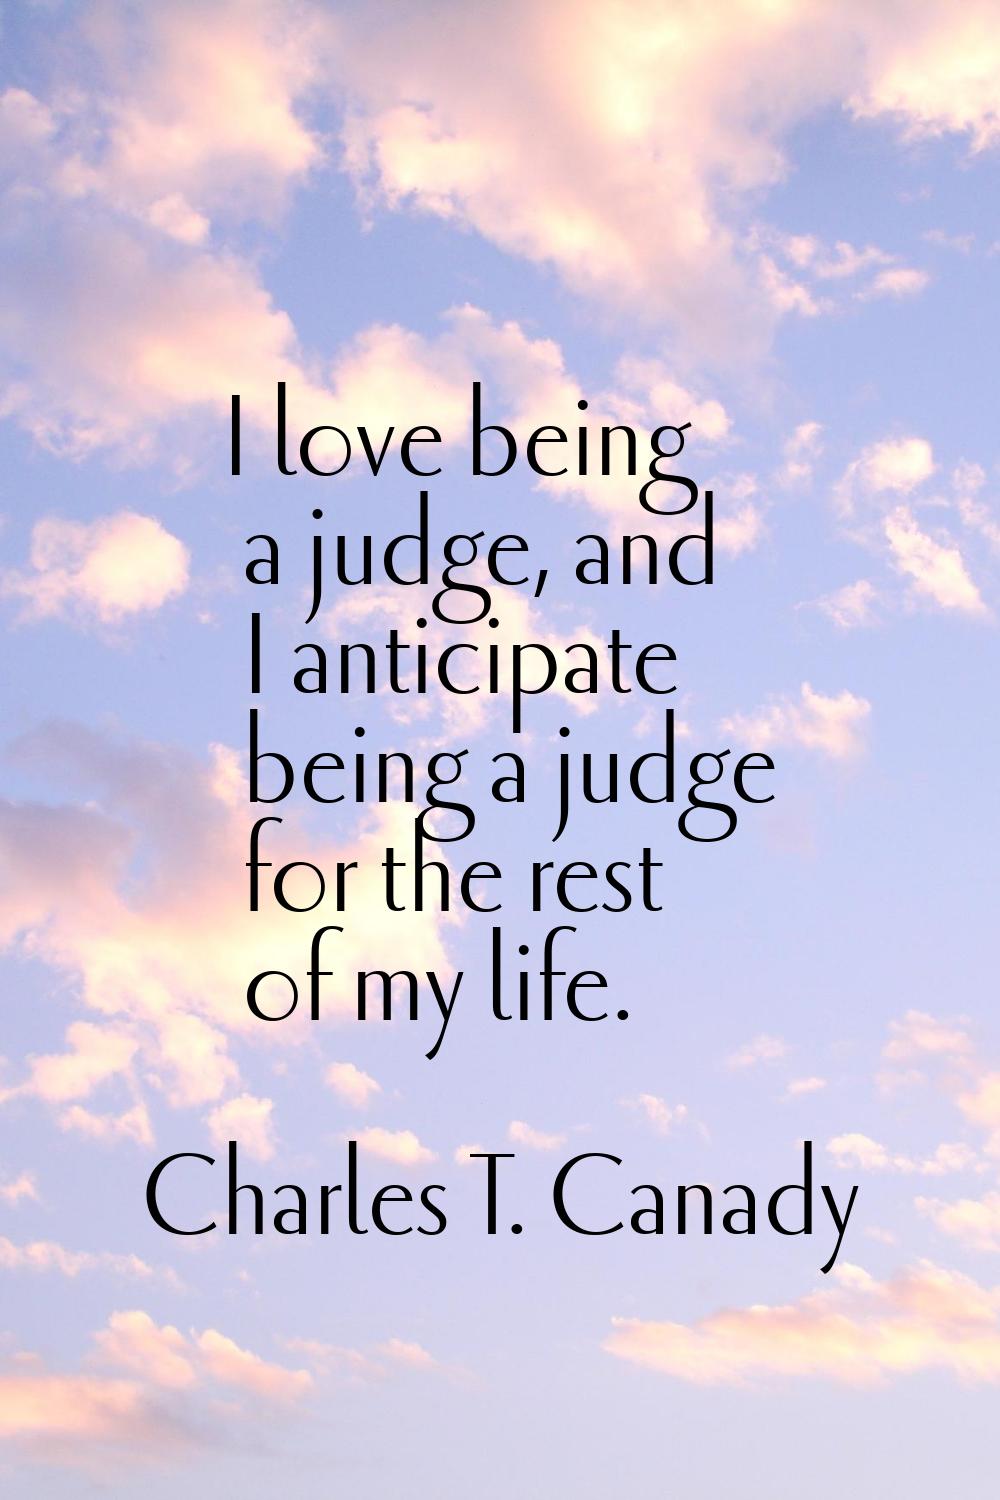 I love being a judge, and I anticipate being a judge for the rest of my life.